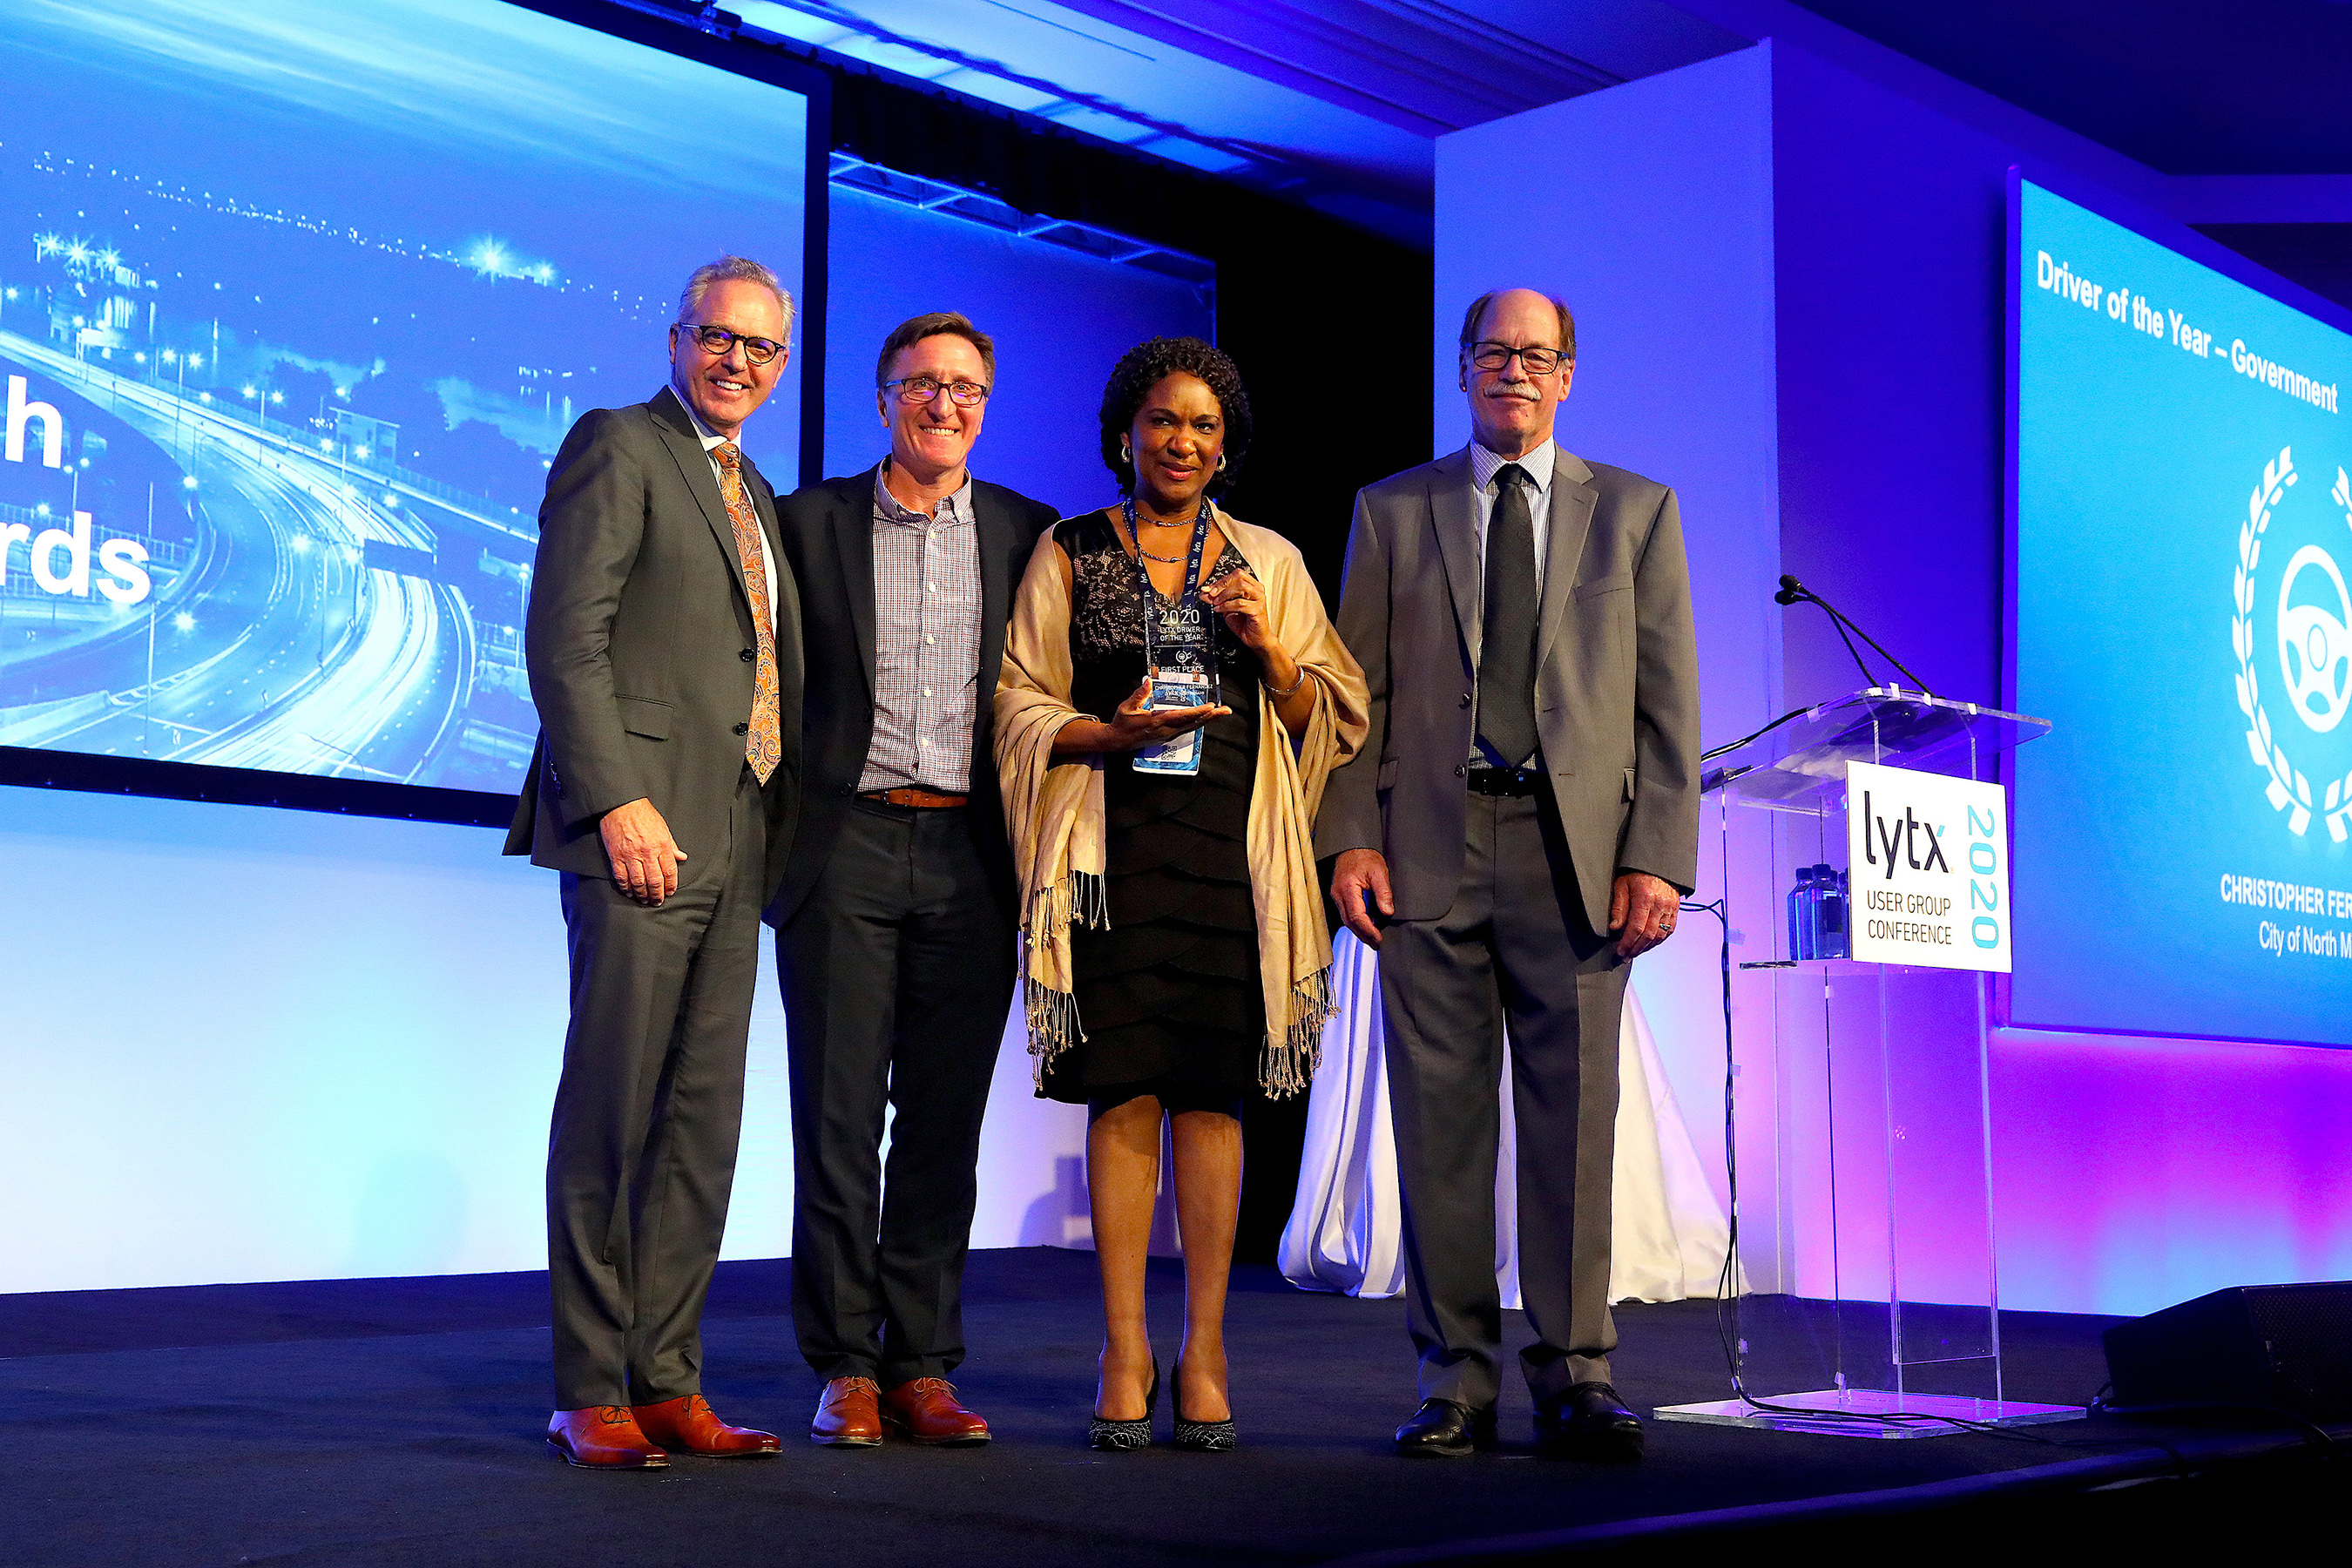 Lytx Driver of the Year, Government Category L-R: Brandon Nixon, Lytx CEO; David Riordan, Lytx EVP and Chief Client Office; Karen Muir, City of North Miami, accepting for Christopher Fernandez; Del Lisk, Lytx VP of Safety Services